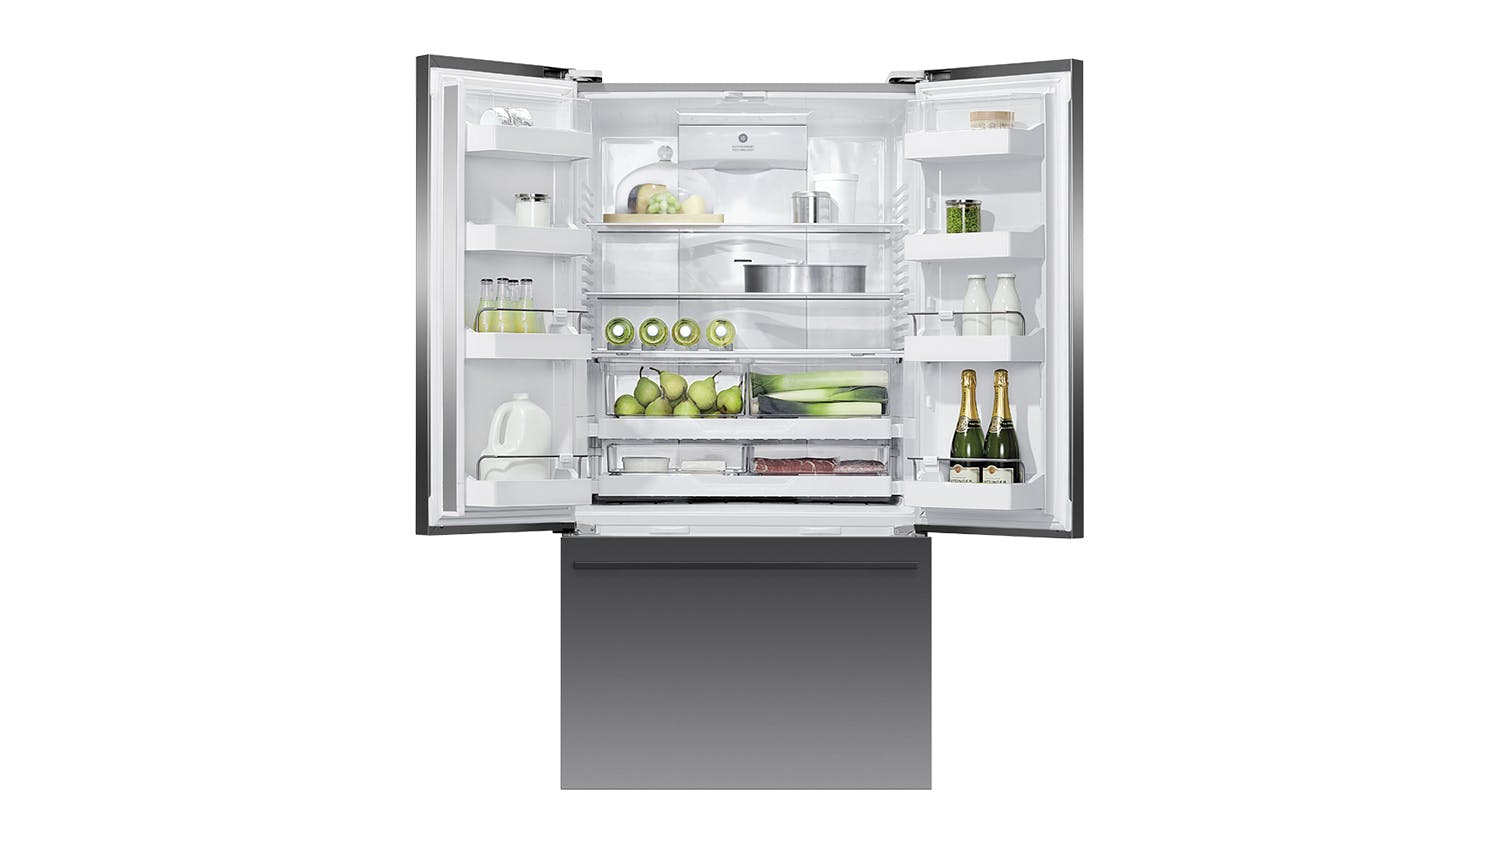 Fisher & Paykel 569L French Door Fridge Freezer with Ice & Water Dispenser - Black Stainless Steel (RF610ADUB5)